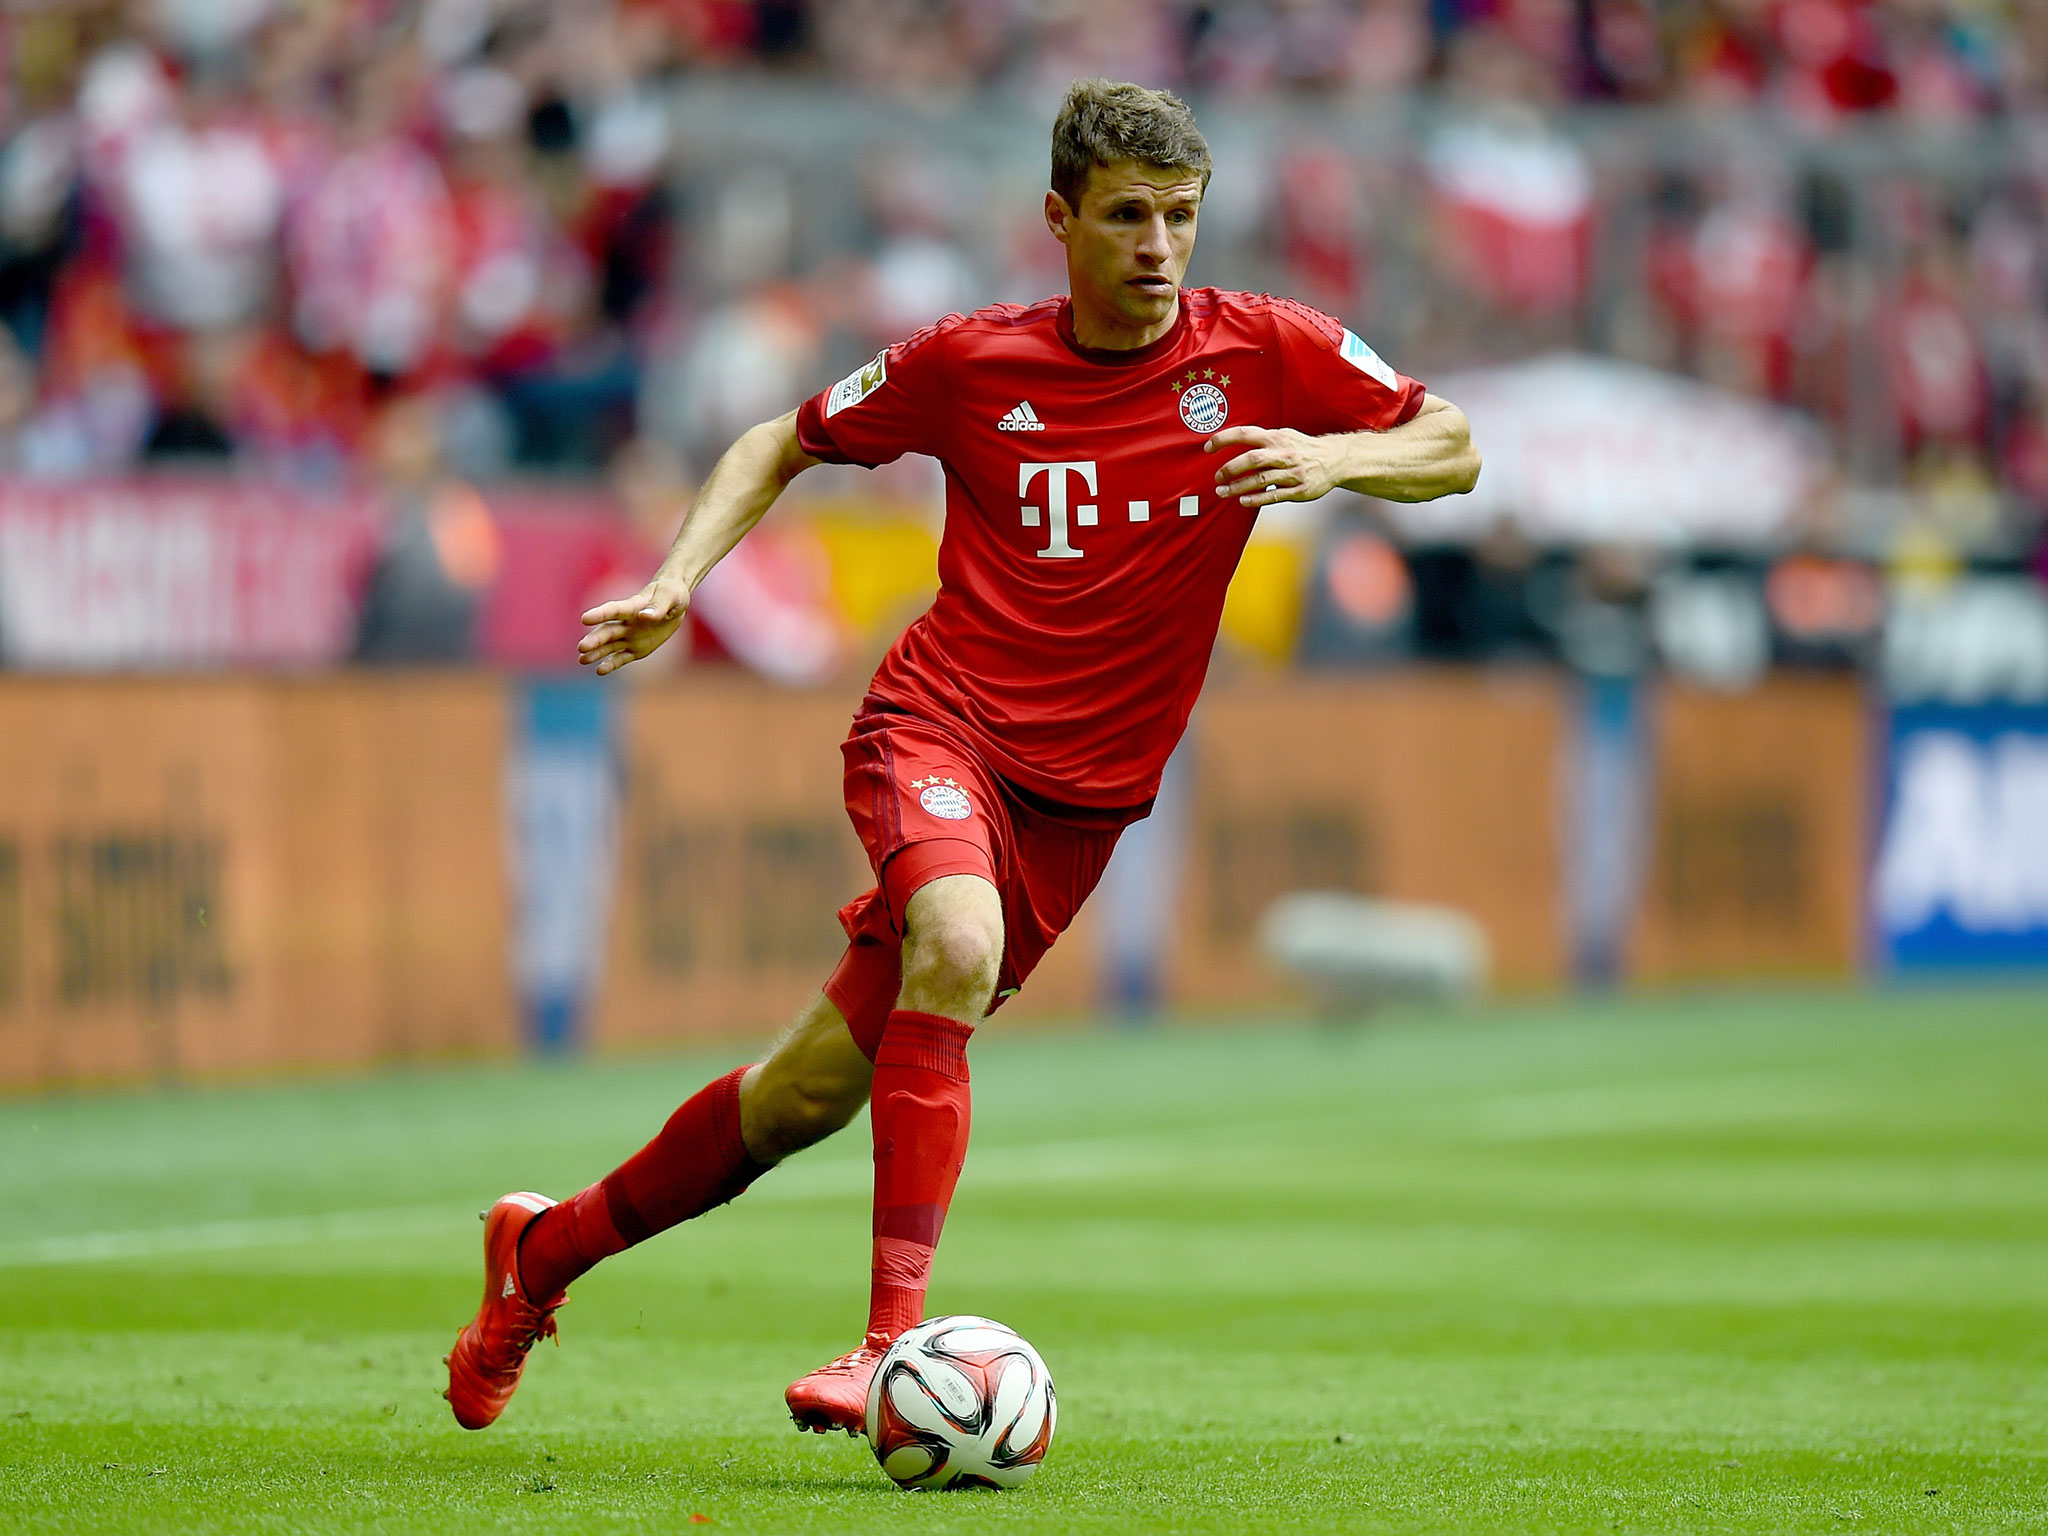 Free download Thomas Muller Wallpaper High Resolution and Quality Download [2048x1536] for your Desktop, Mobile & Tablet. Explore Thomas Müller Wallpaper. Thomas Müller Wallpaper, Thomas Wallpaper, Thomas Kincade Wallpaper